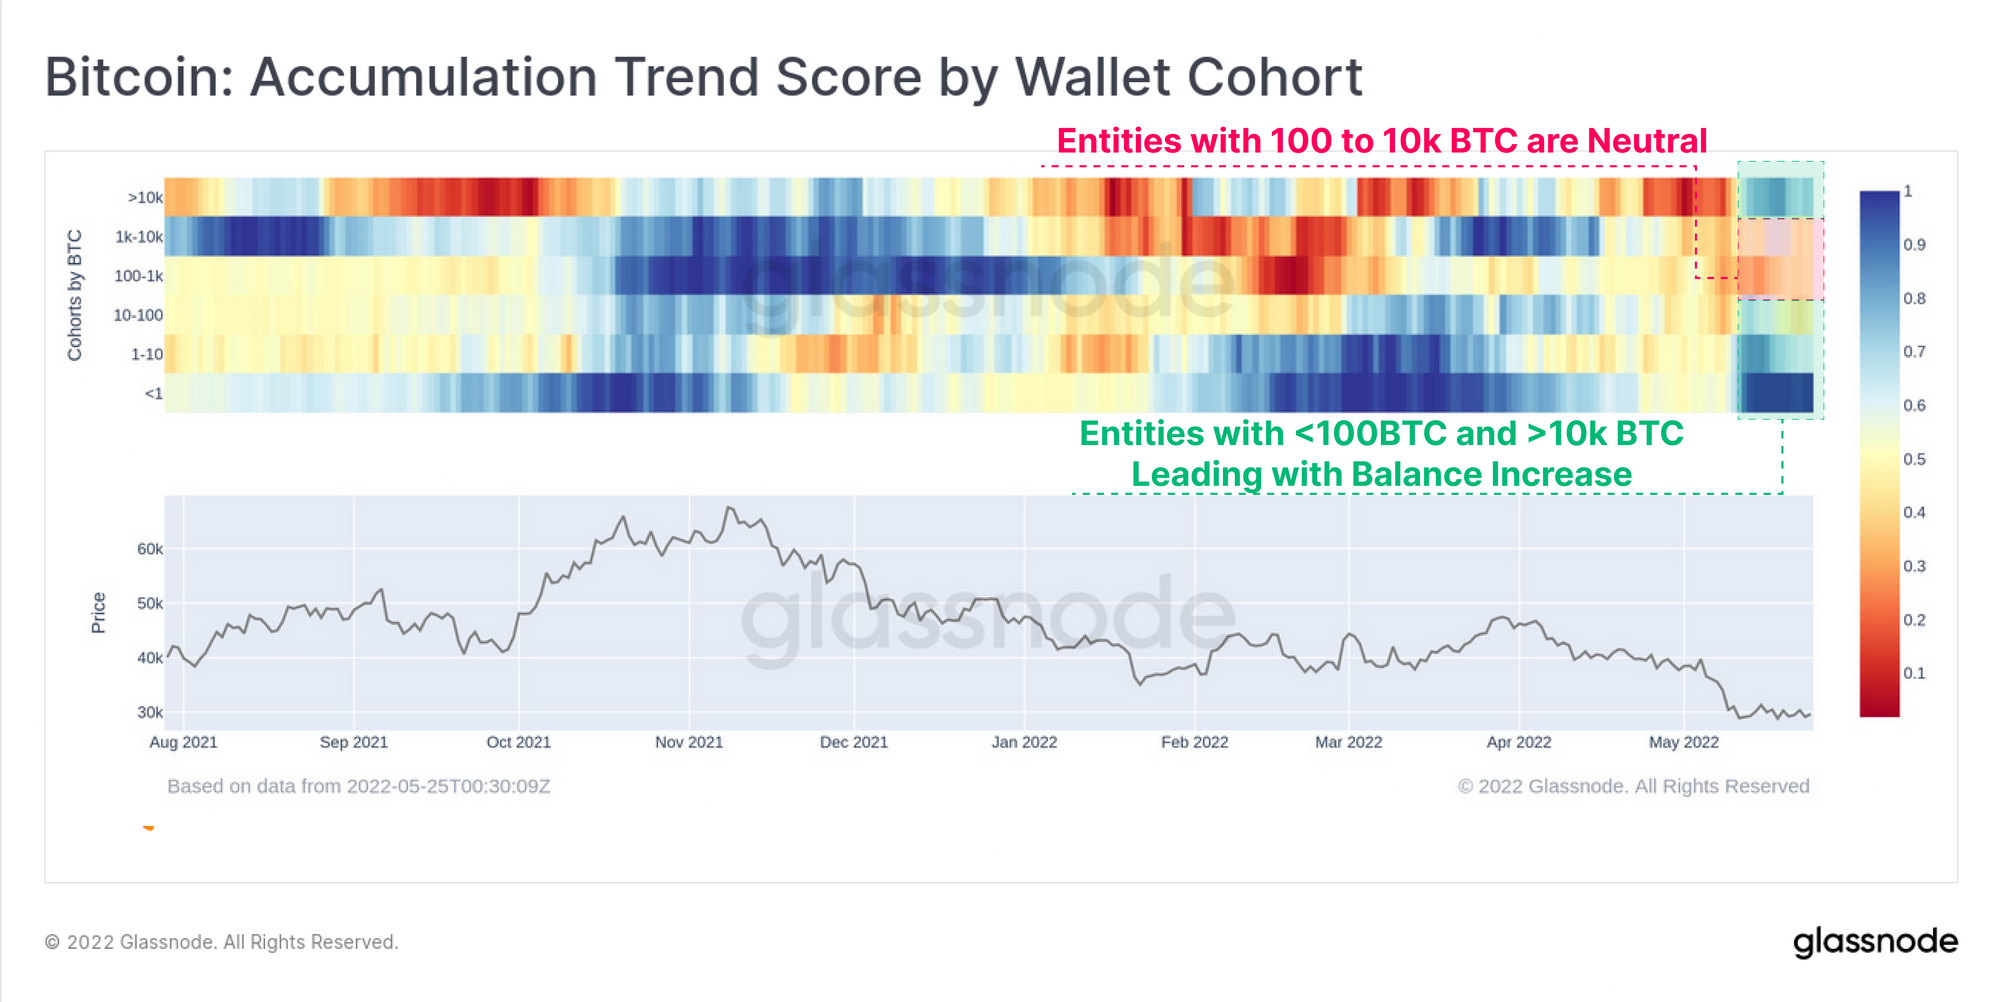 Bitcoin: Accumulation Trend Score by Wallet Cohort